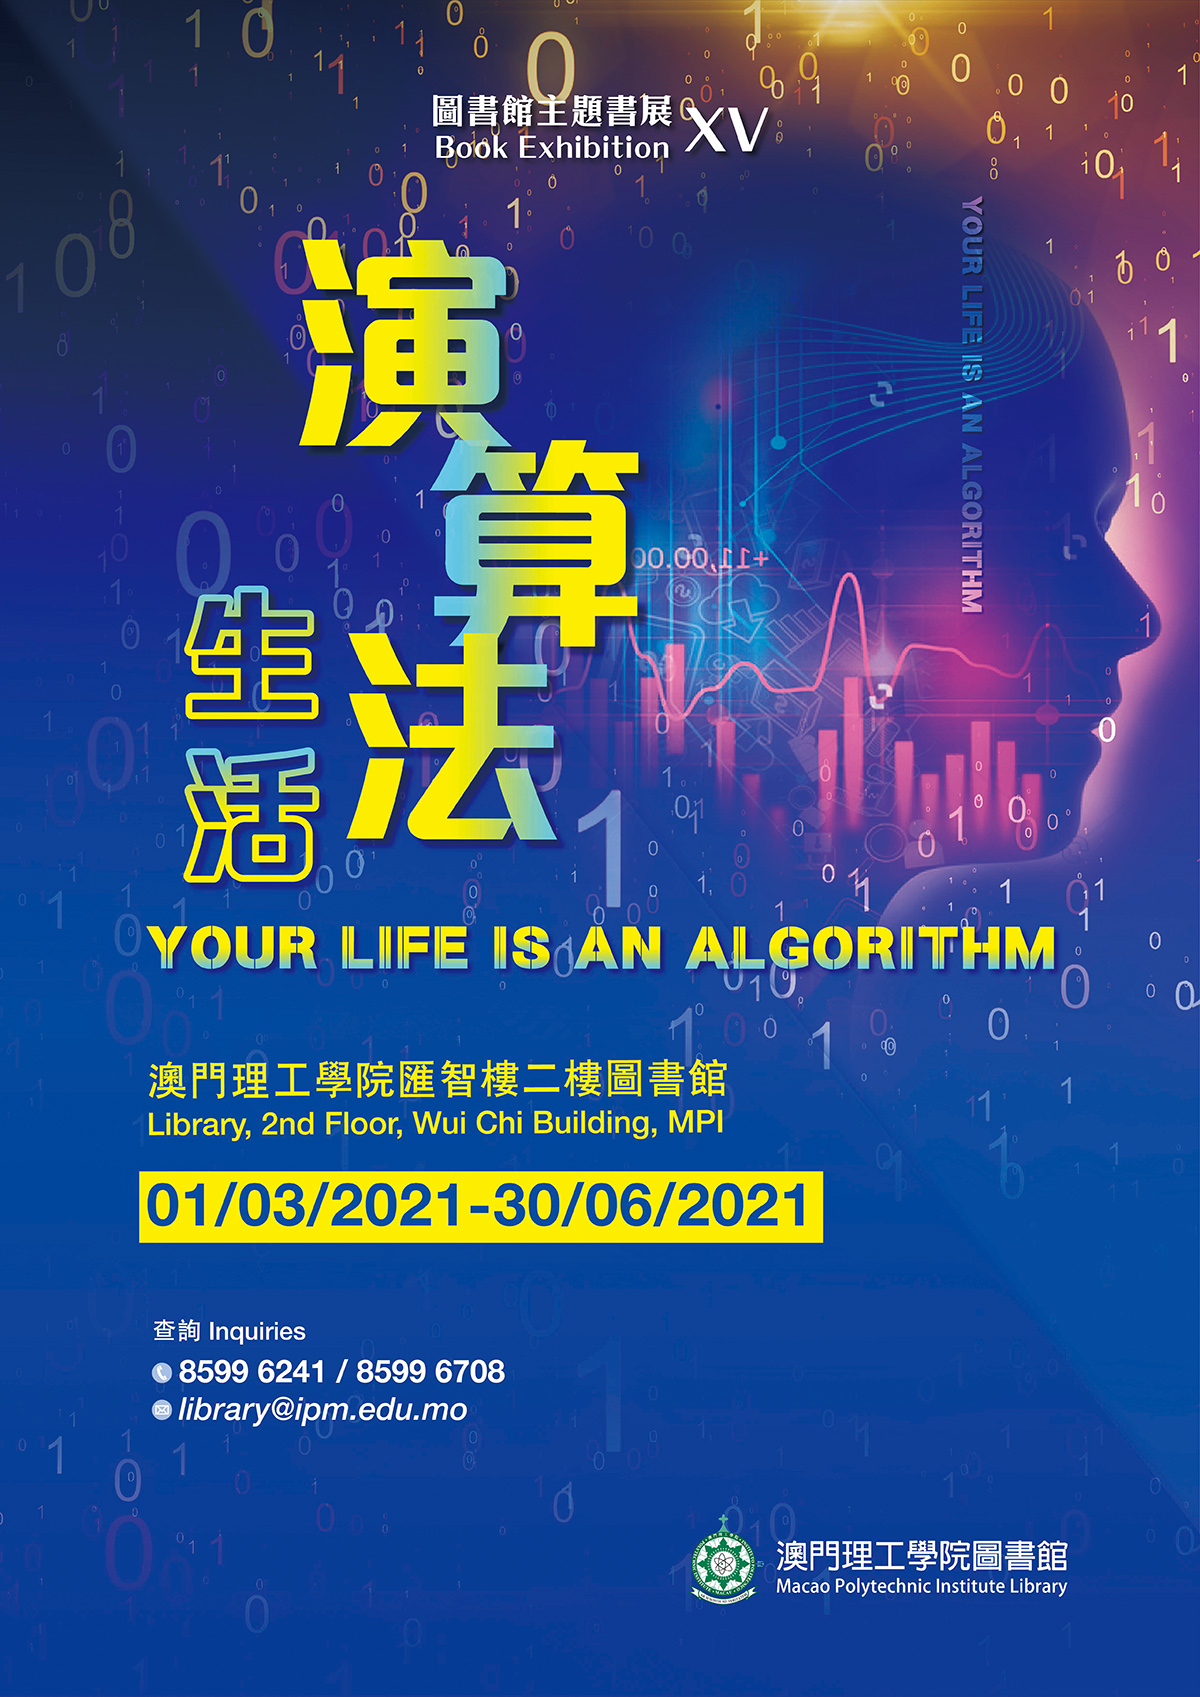 LIBRARY BOOK EXHIBITION 15 - YOUR LIFE IS AN ALGORITHM